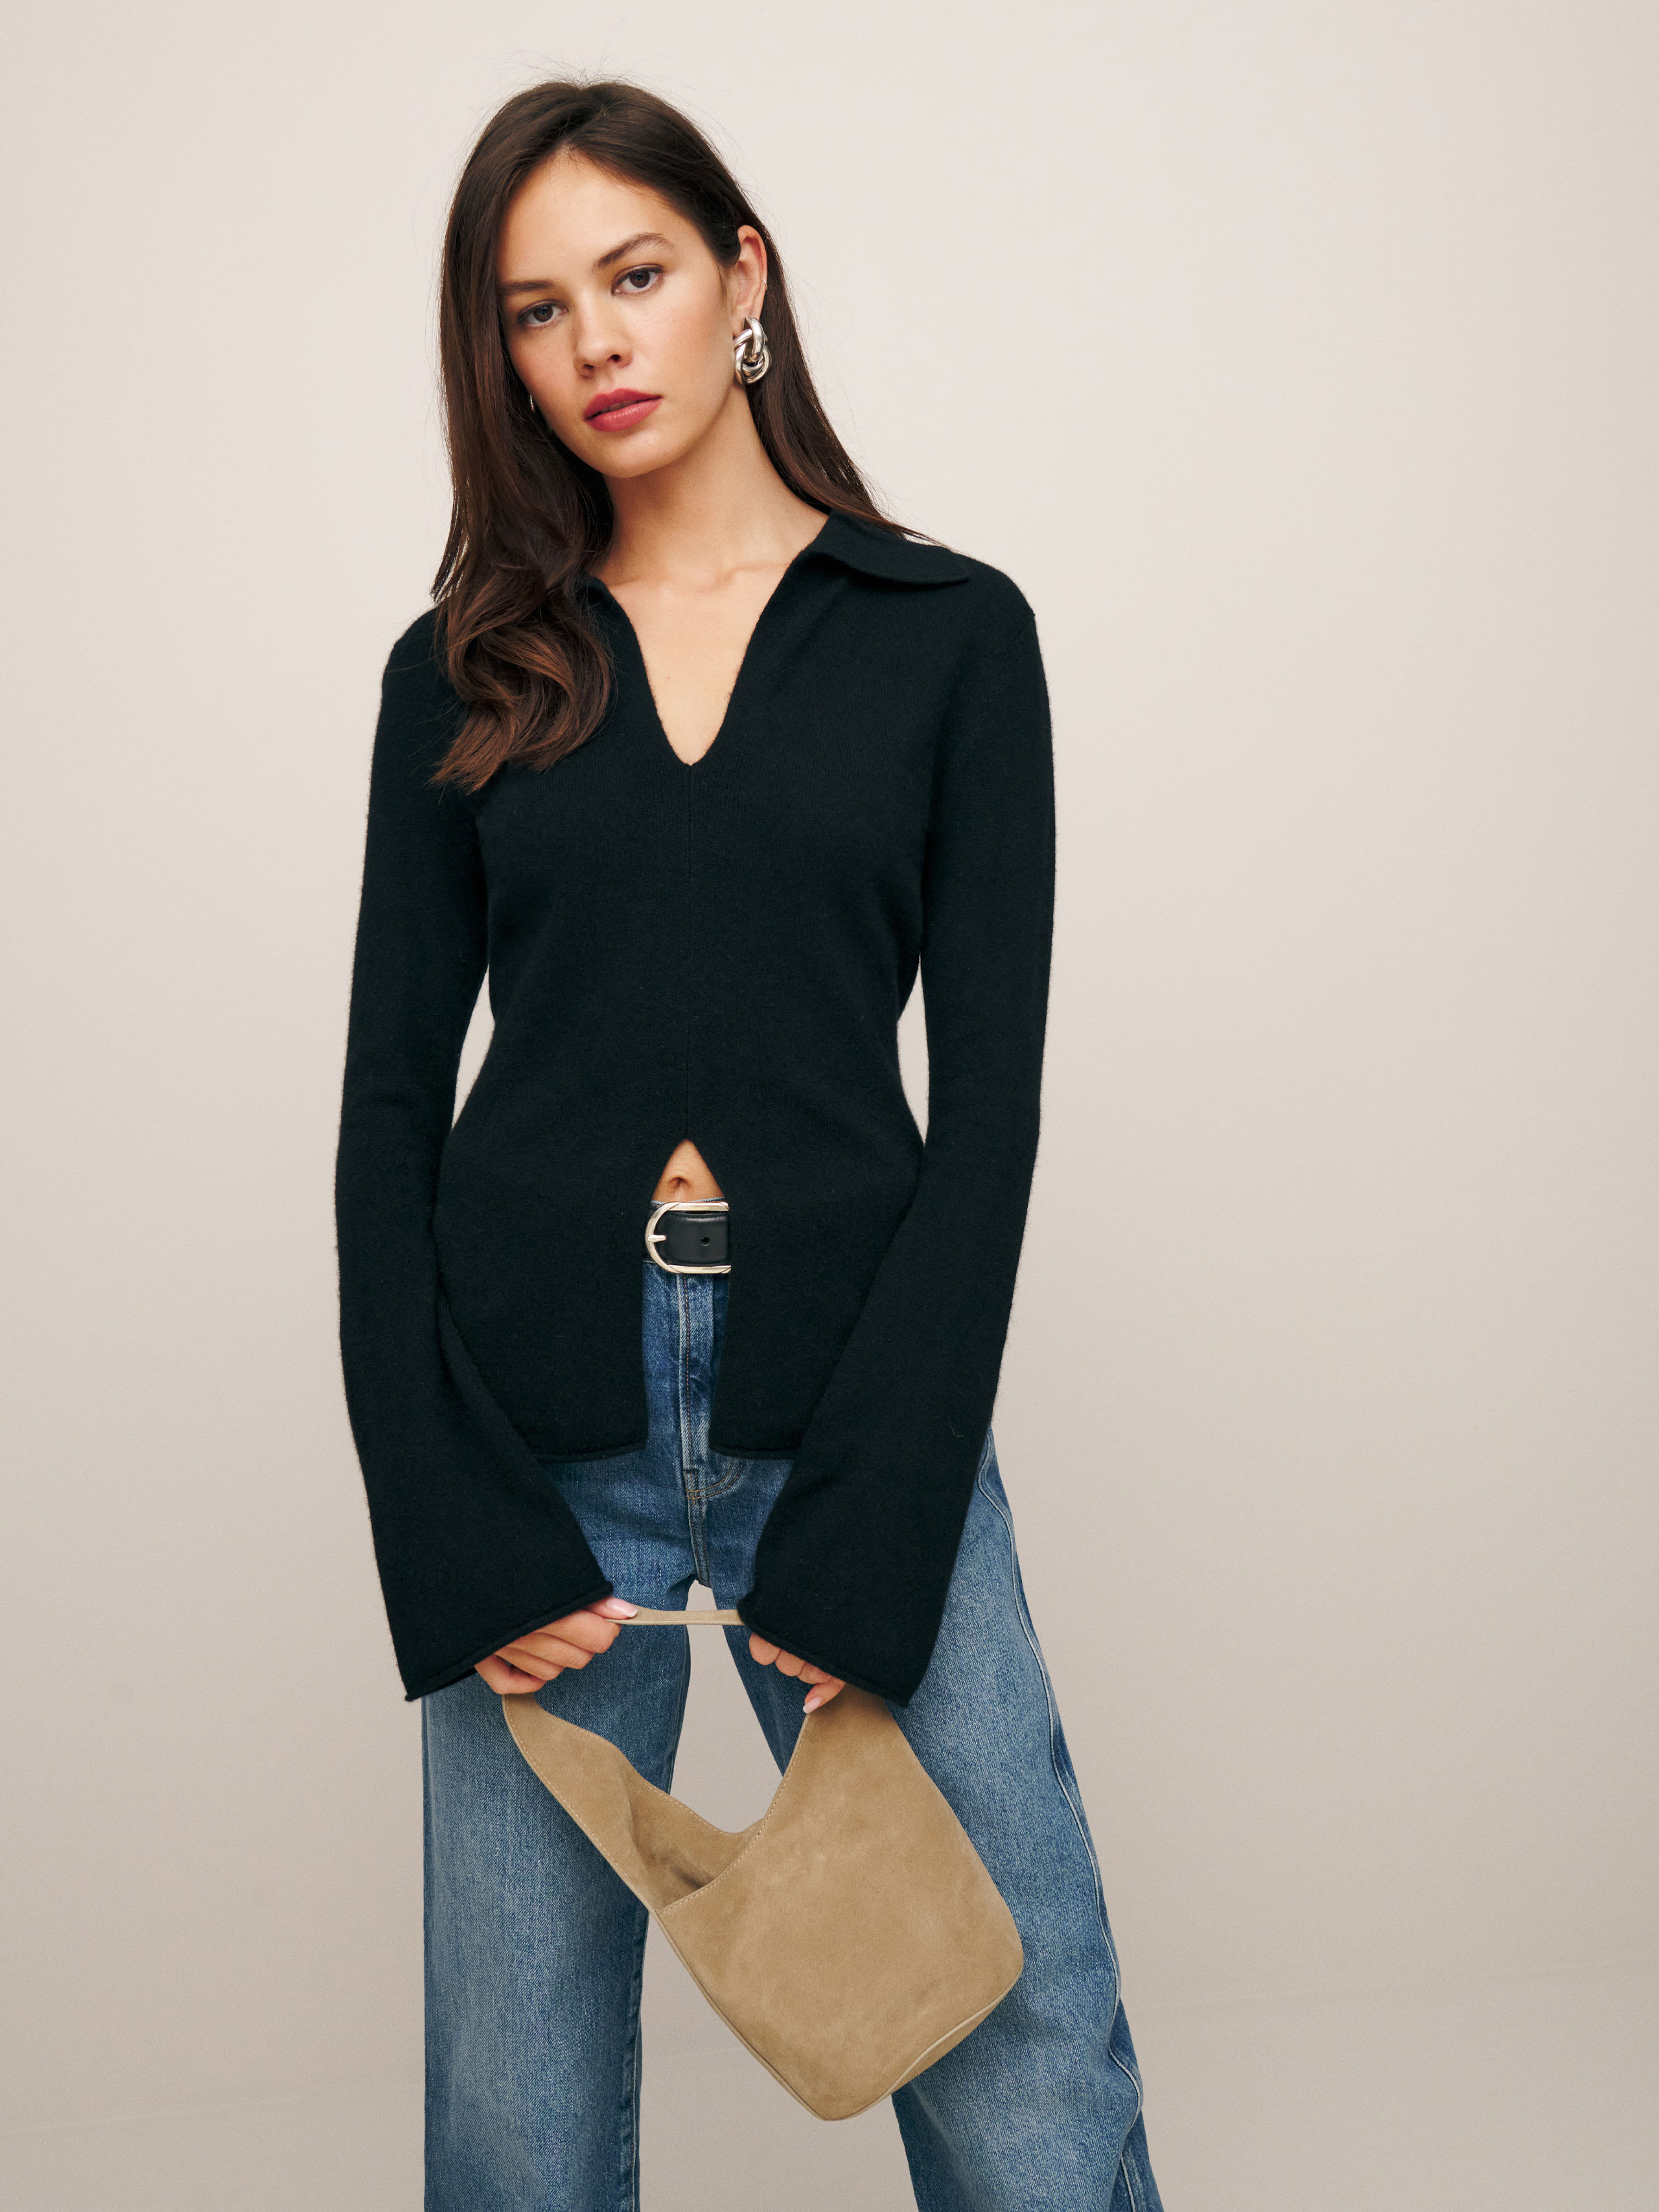 Reformation Jade Cashmere Collared Sweater In Black